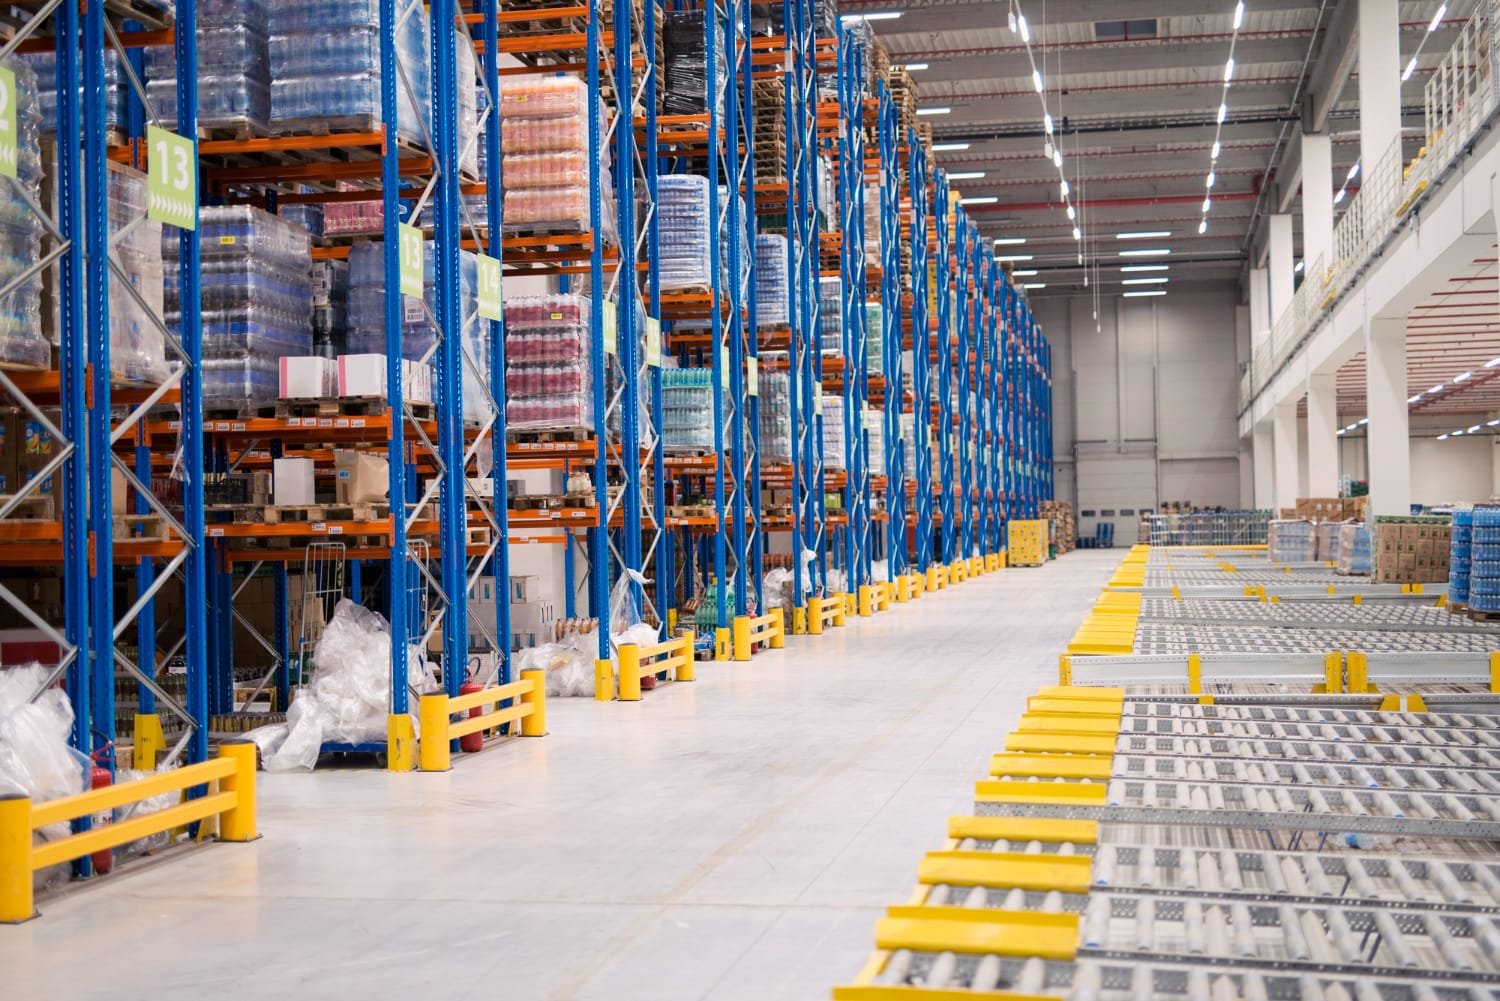 Choosing the Right Racking System for Your Needs